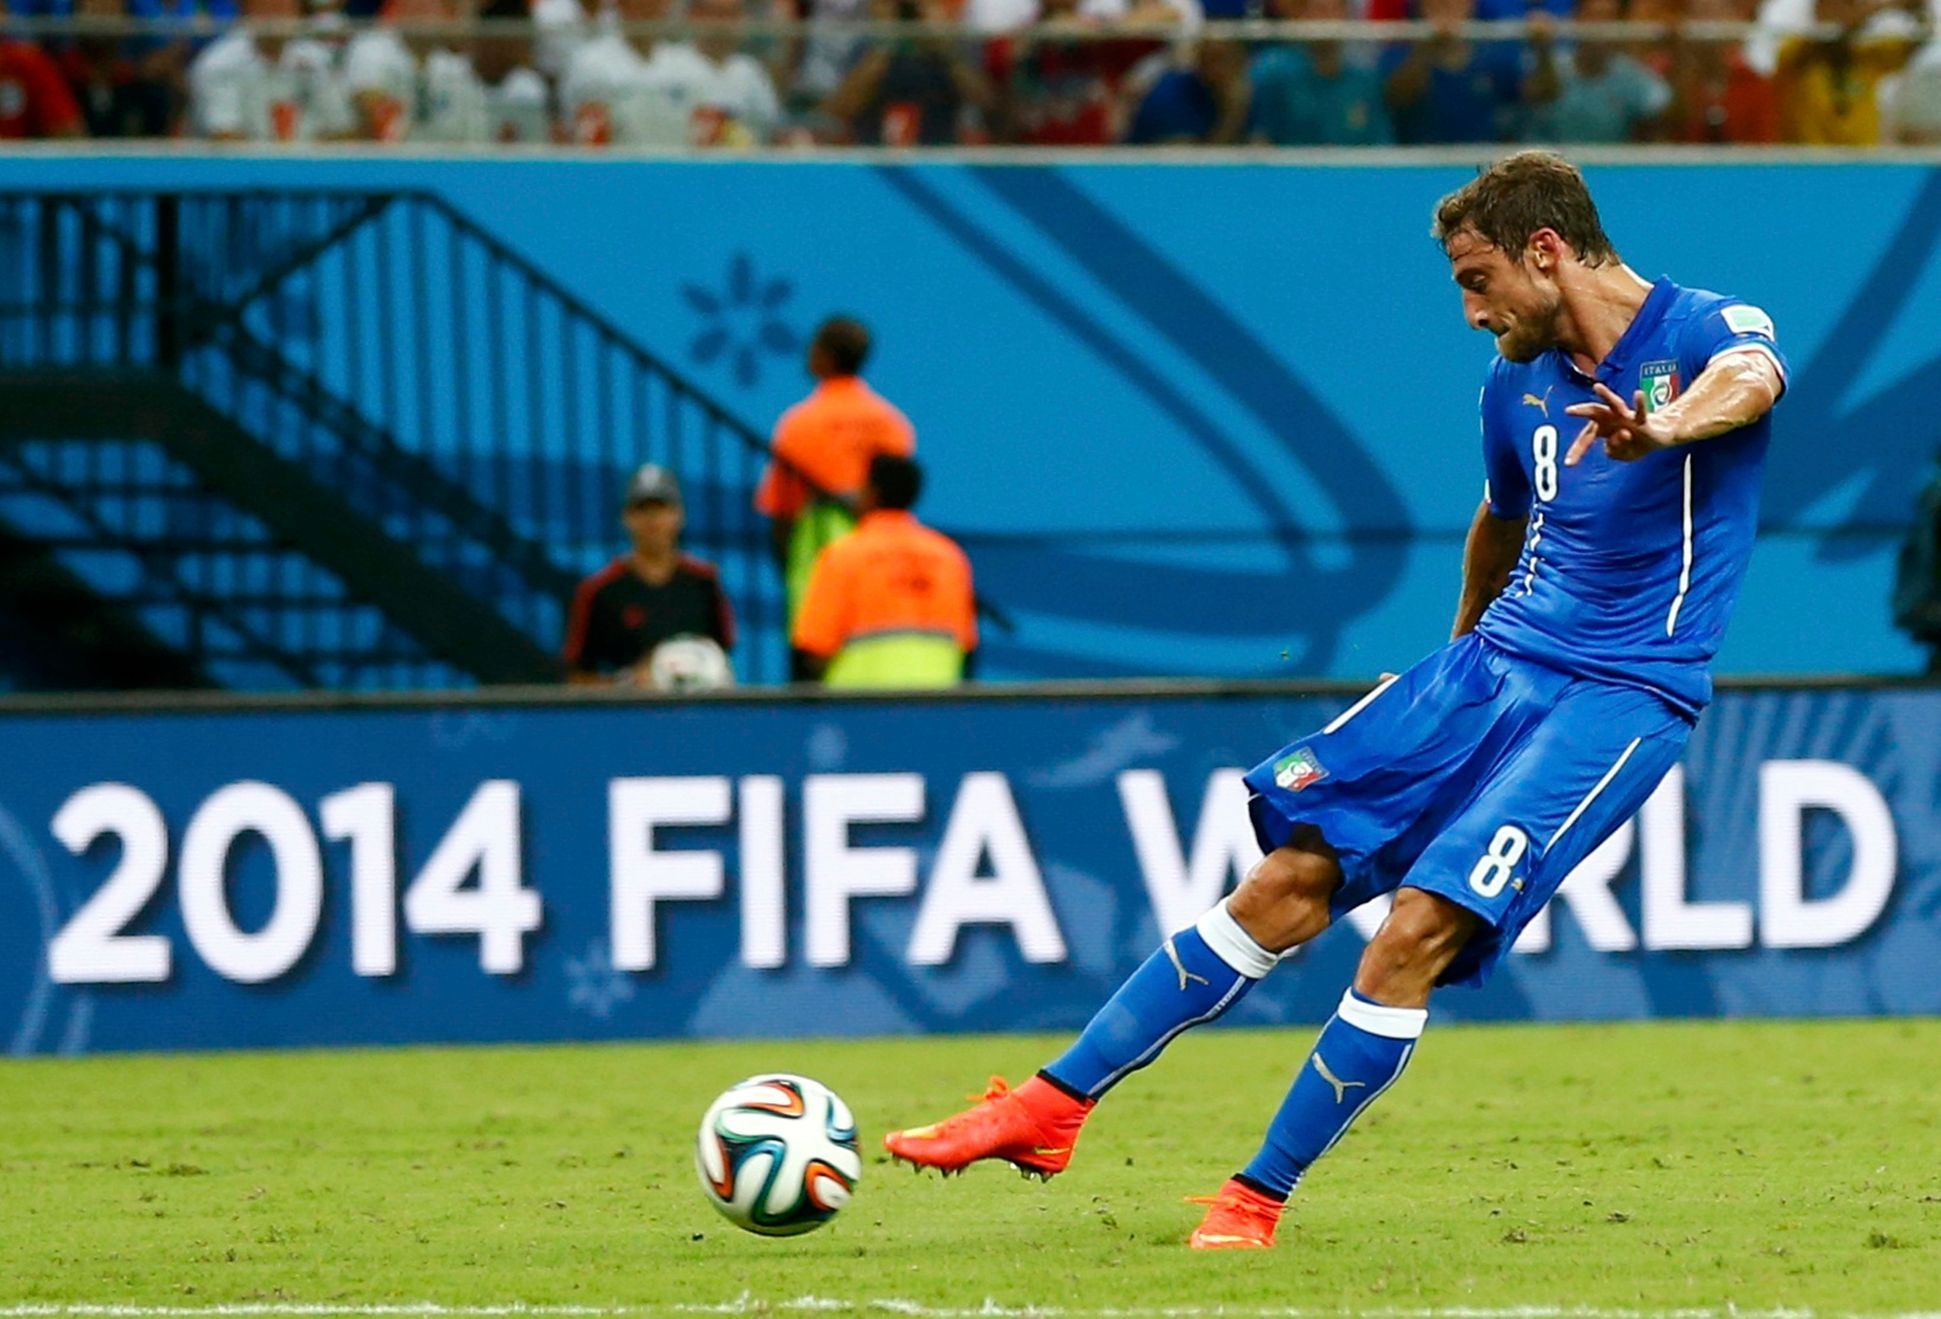 Italy's Claudio Marchisio scores a goal during their 2014 World Cup Group D soccer match against England at the Amazonia arena in Manaus